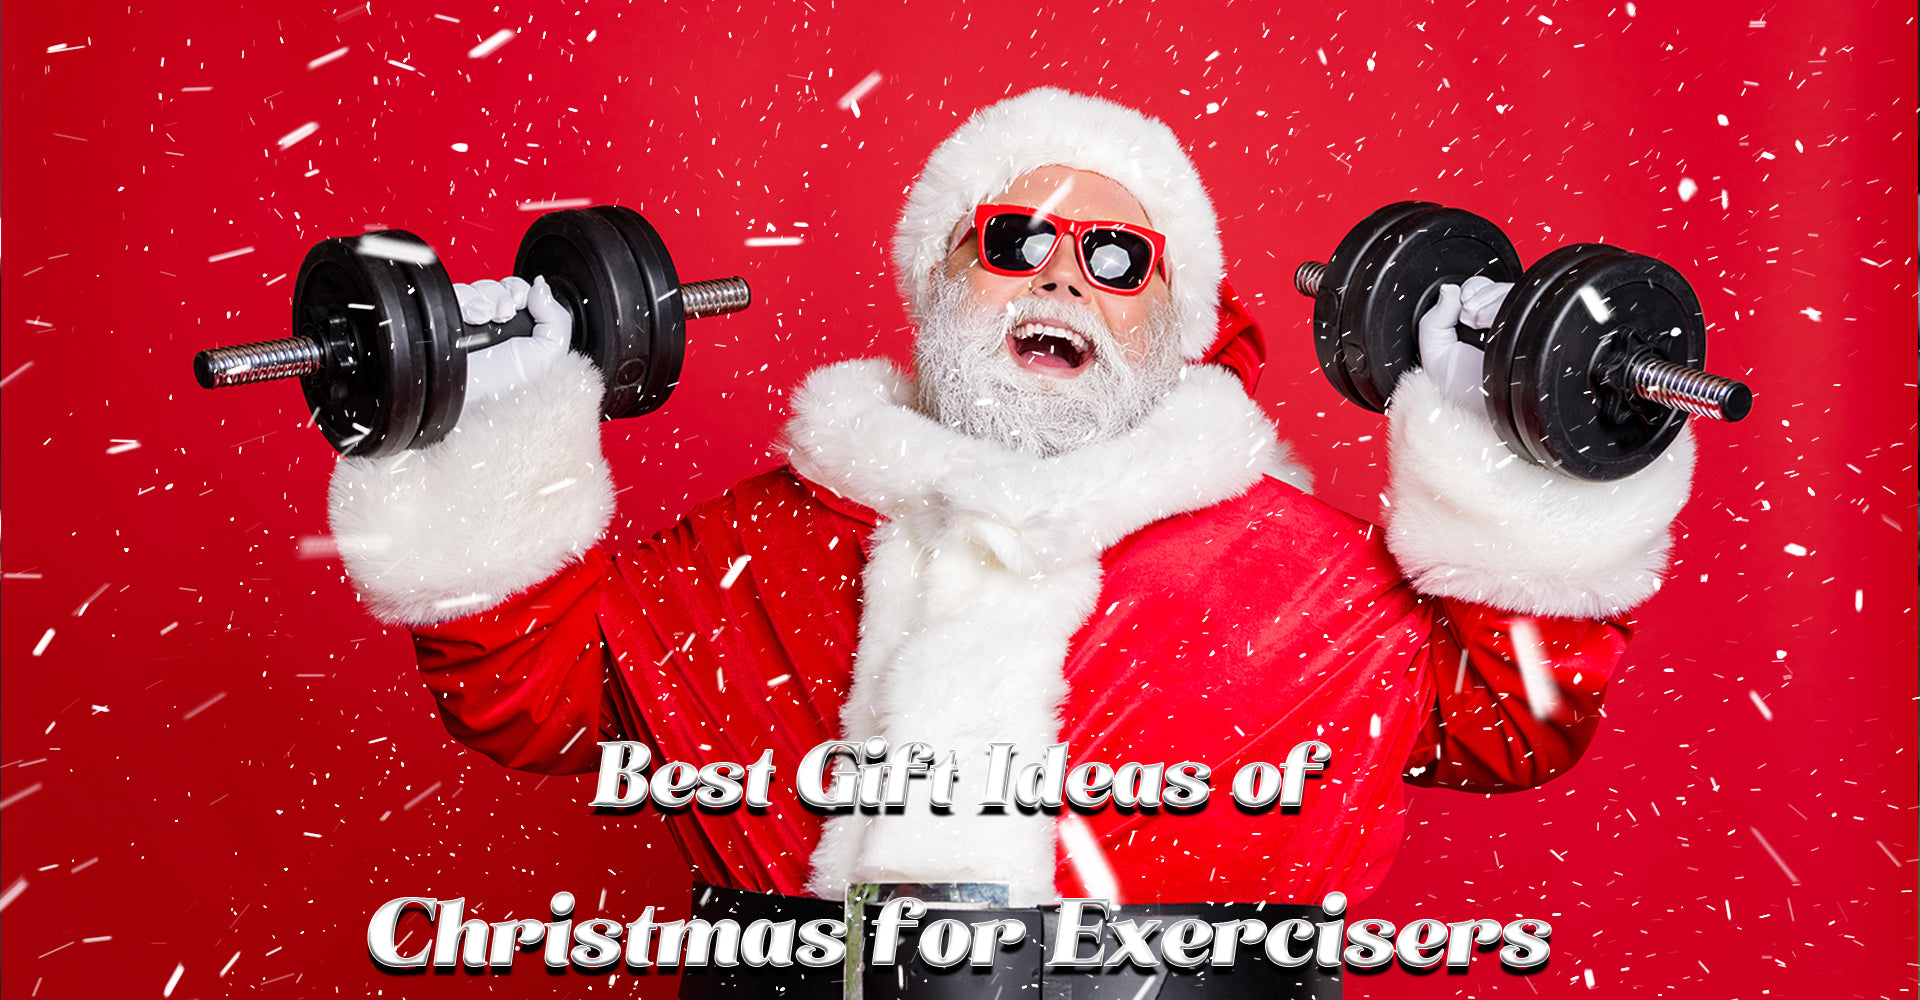 Best Gift Ideas of Christmas for Exercisers